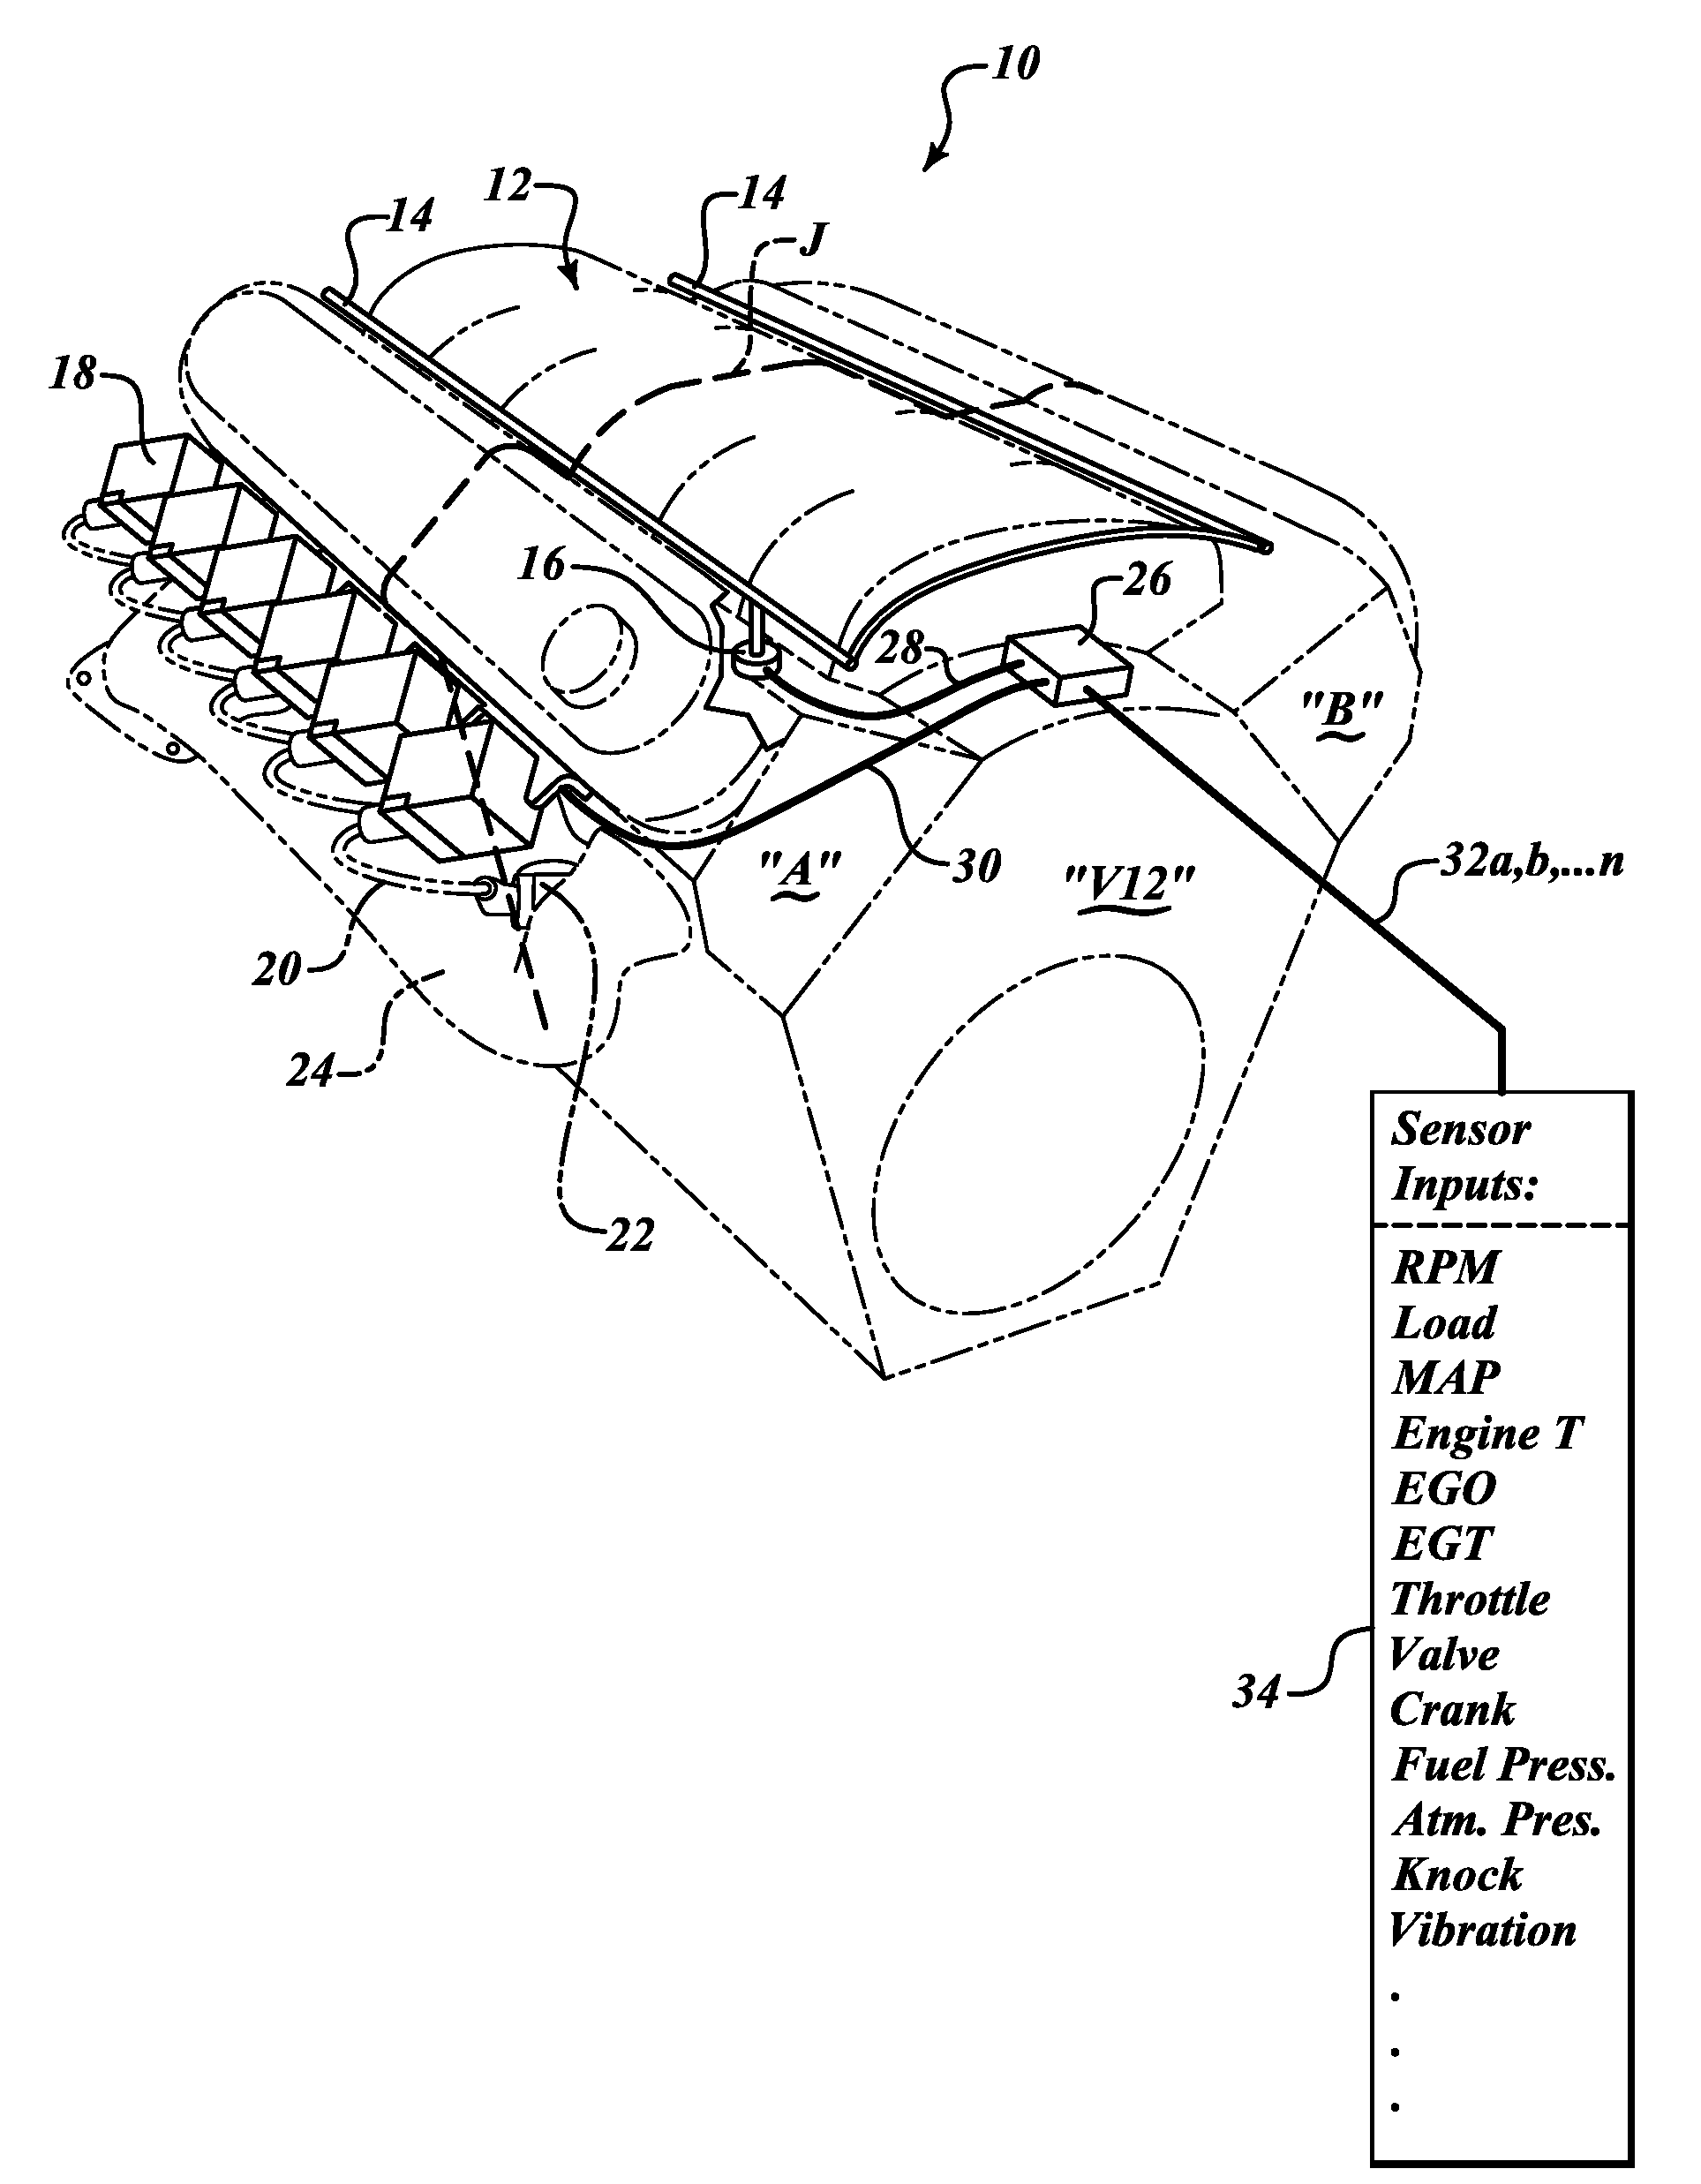 Even fire 90a°v12 IC engines, fueling and firing sequence controllers, and methods of operation by ps/p technology and ifr compensation by fuel feed control